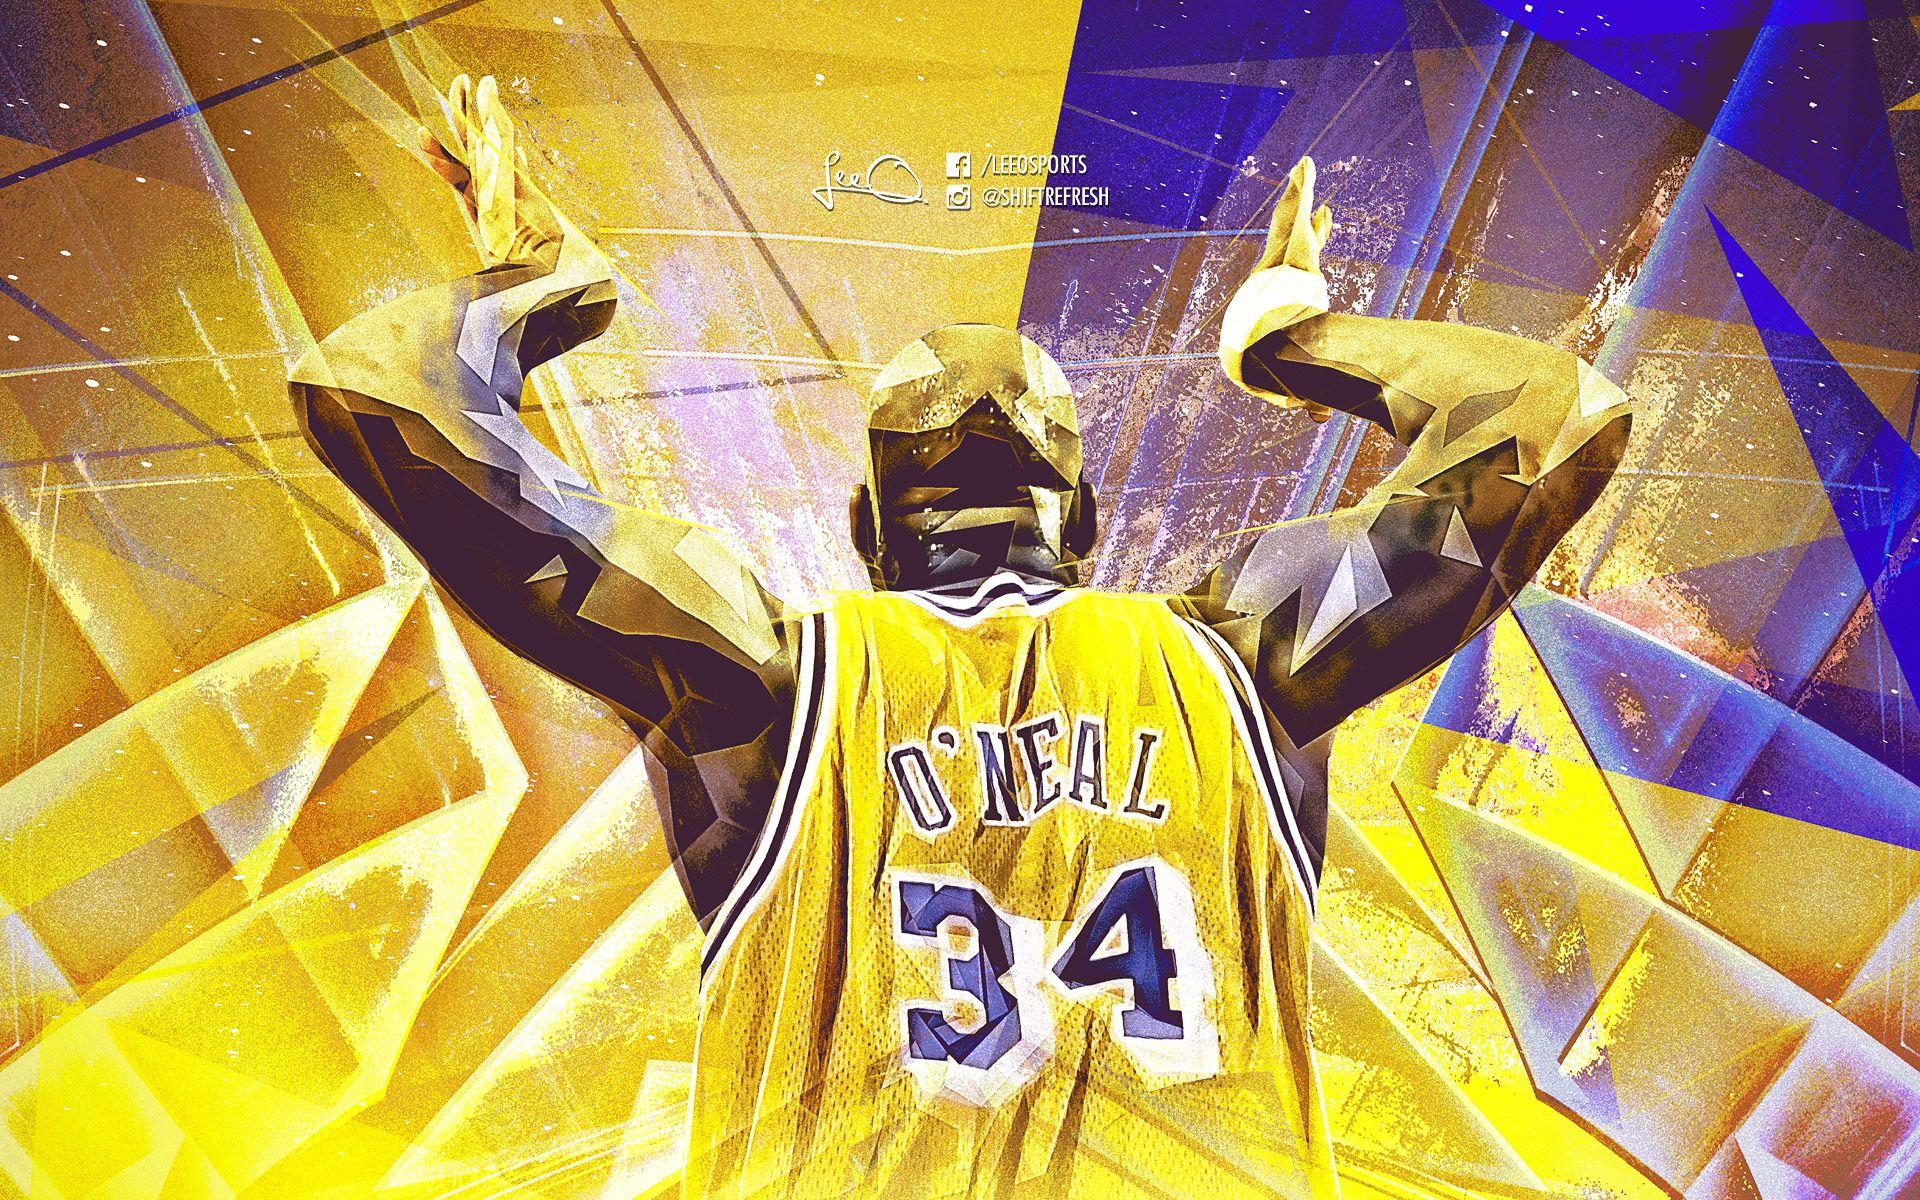 Its a Celebration   Nba pictures Shaquille oneal Shaq o neal